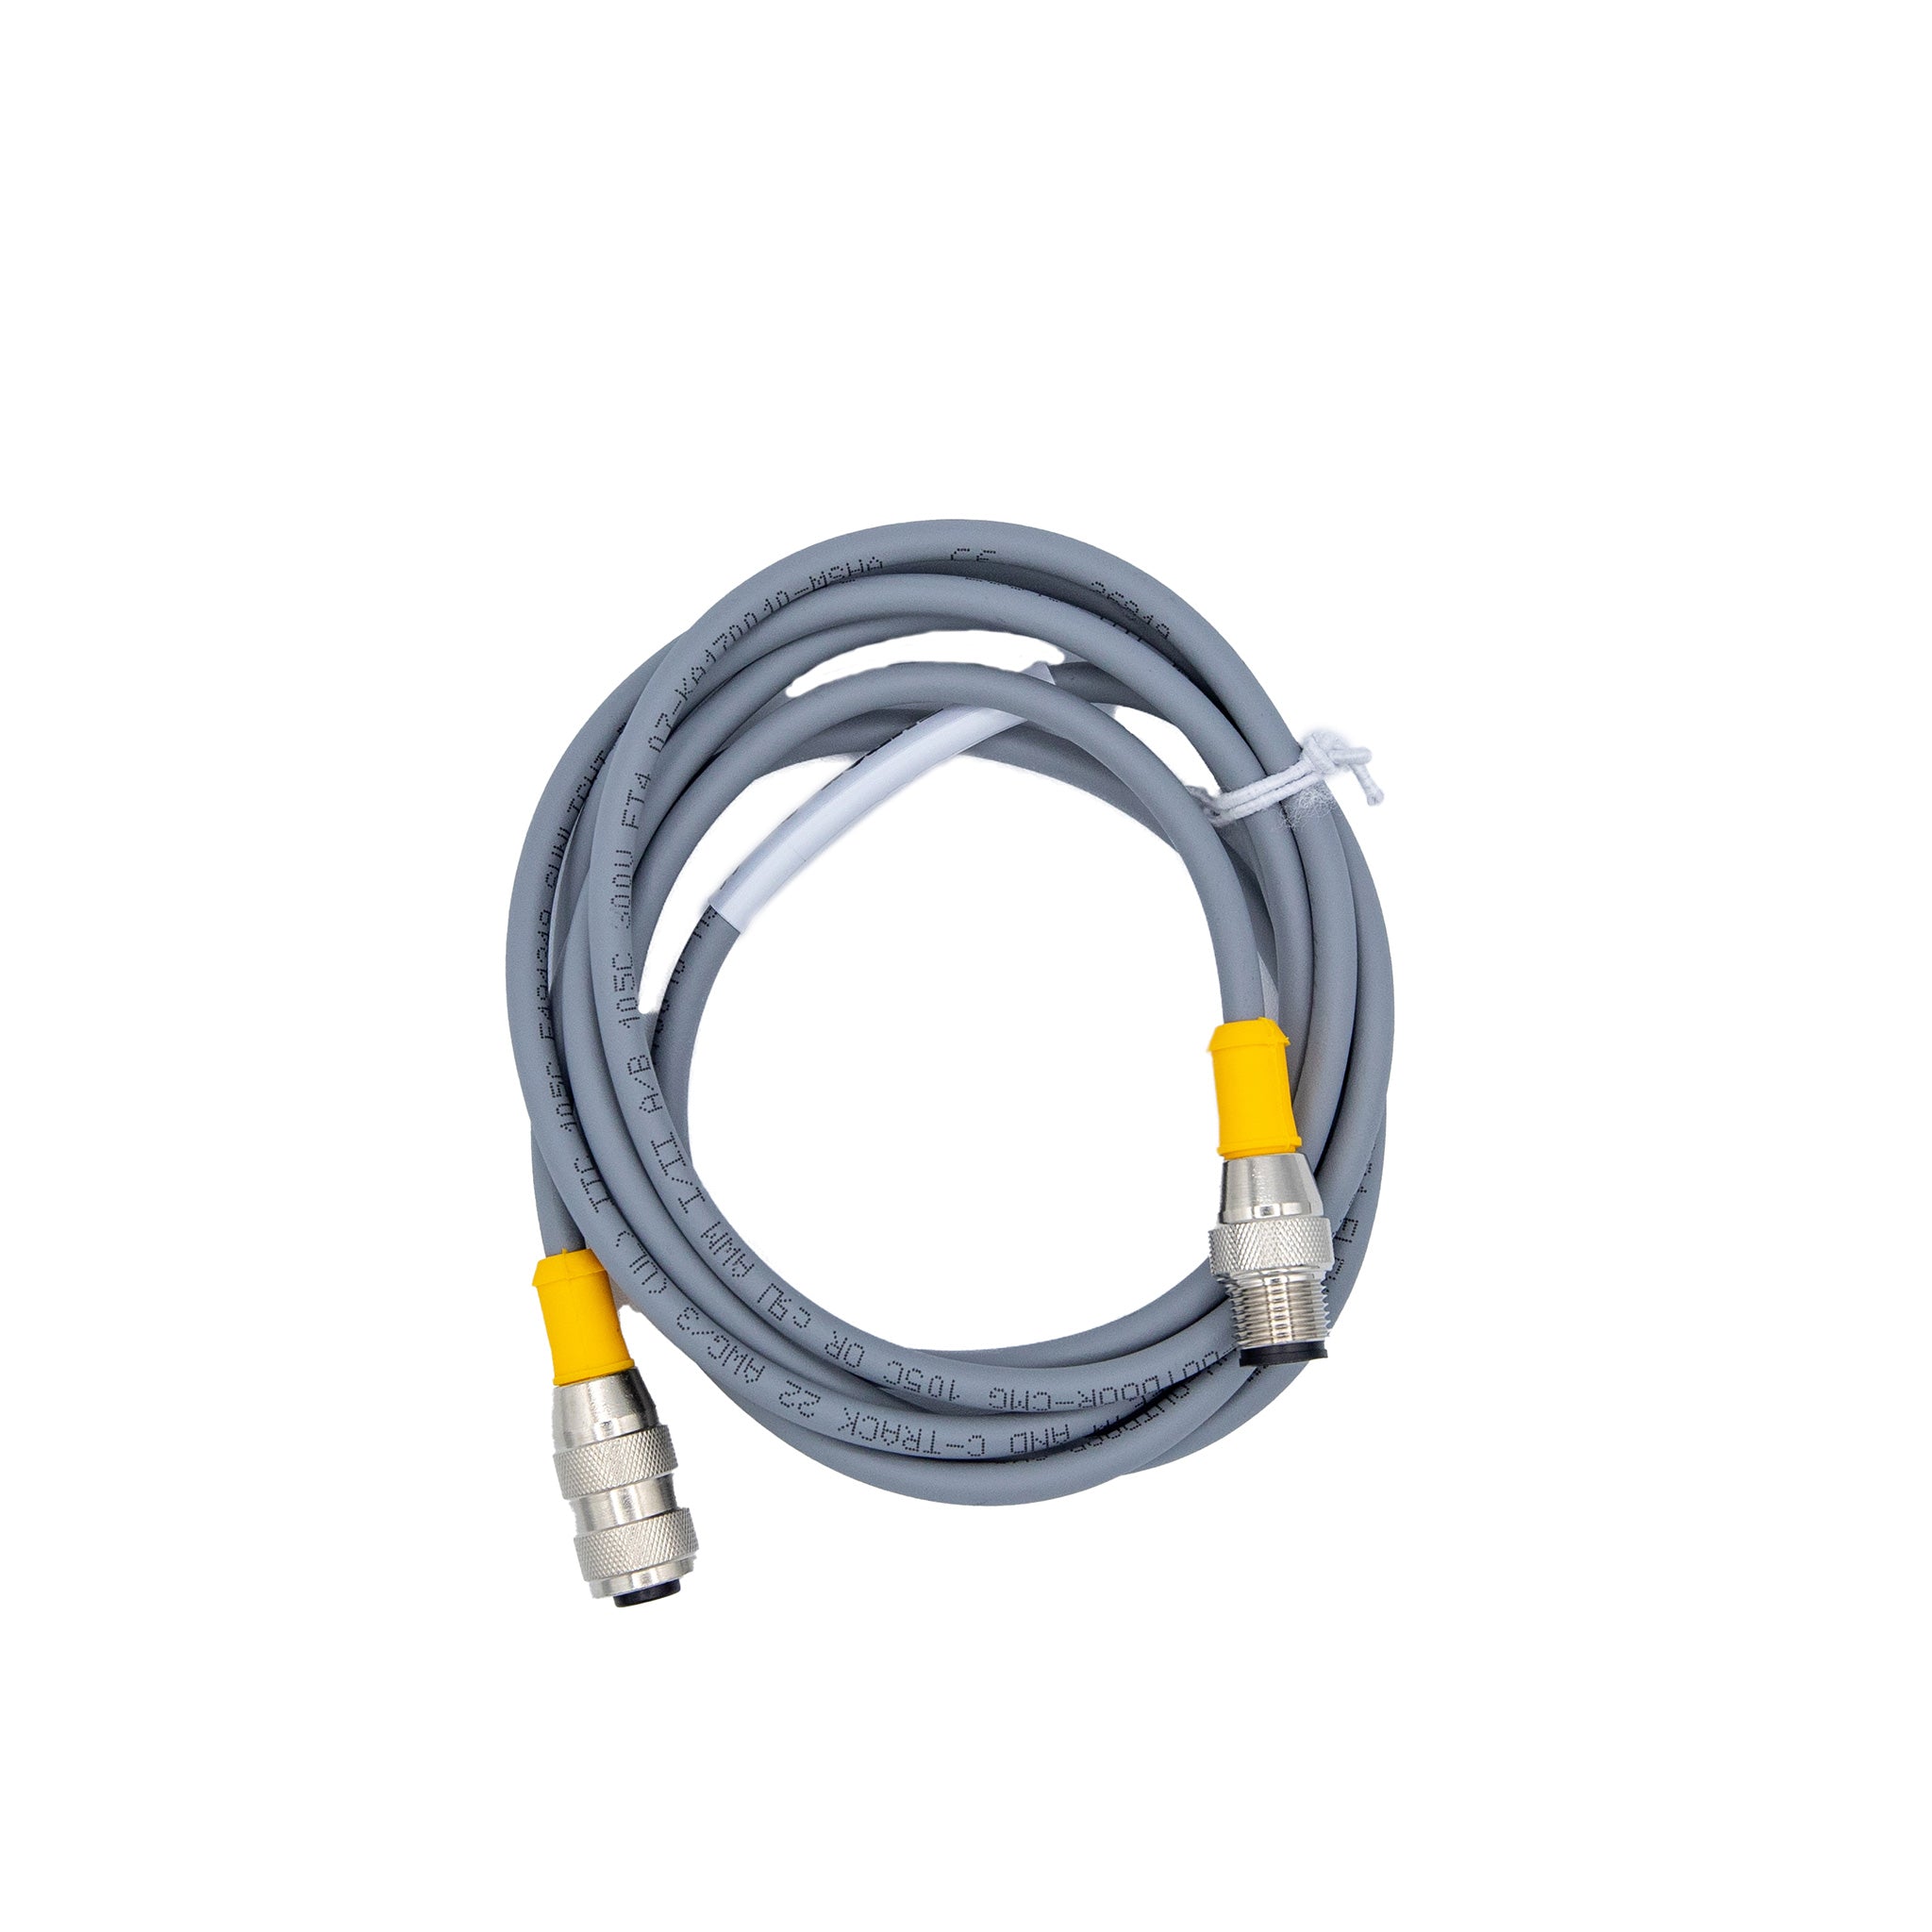 Turk QD RTD Extension Cable (Long) for the Impact Cryosauna